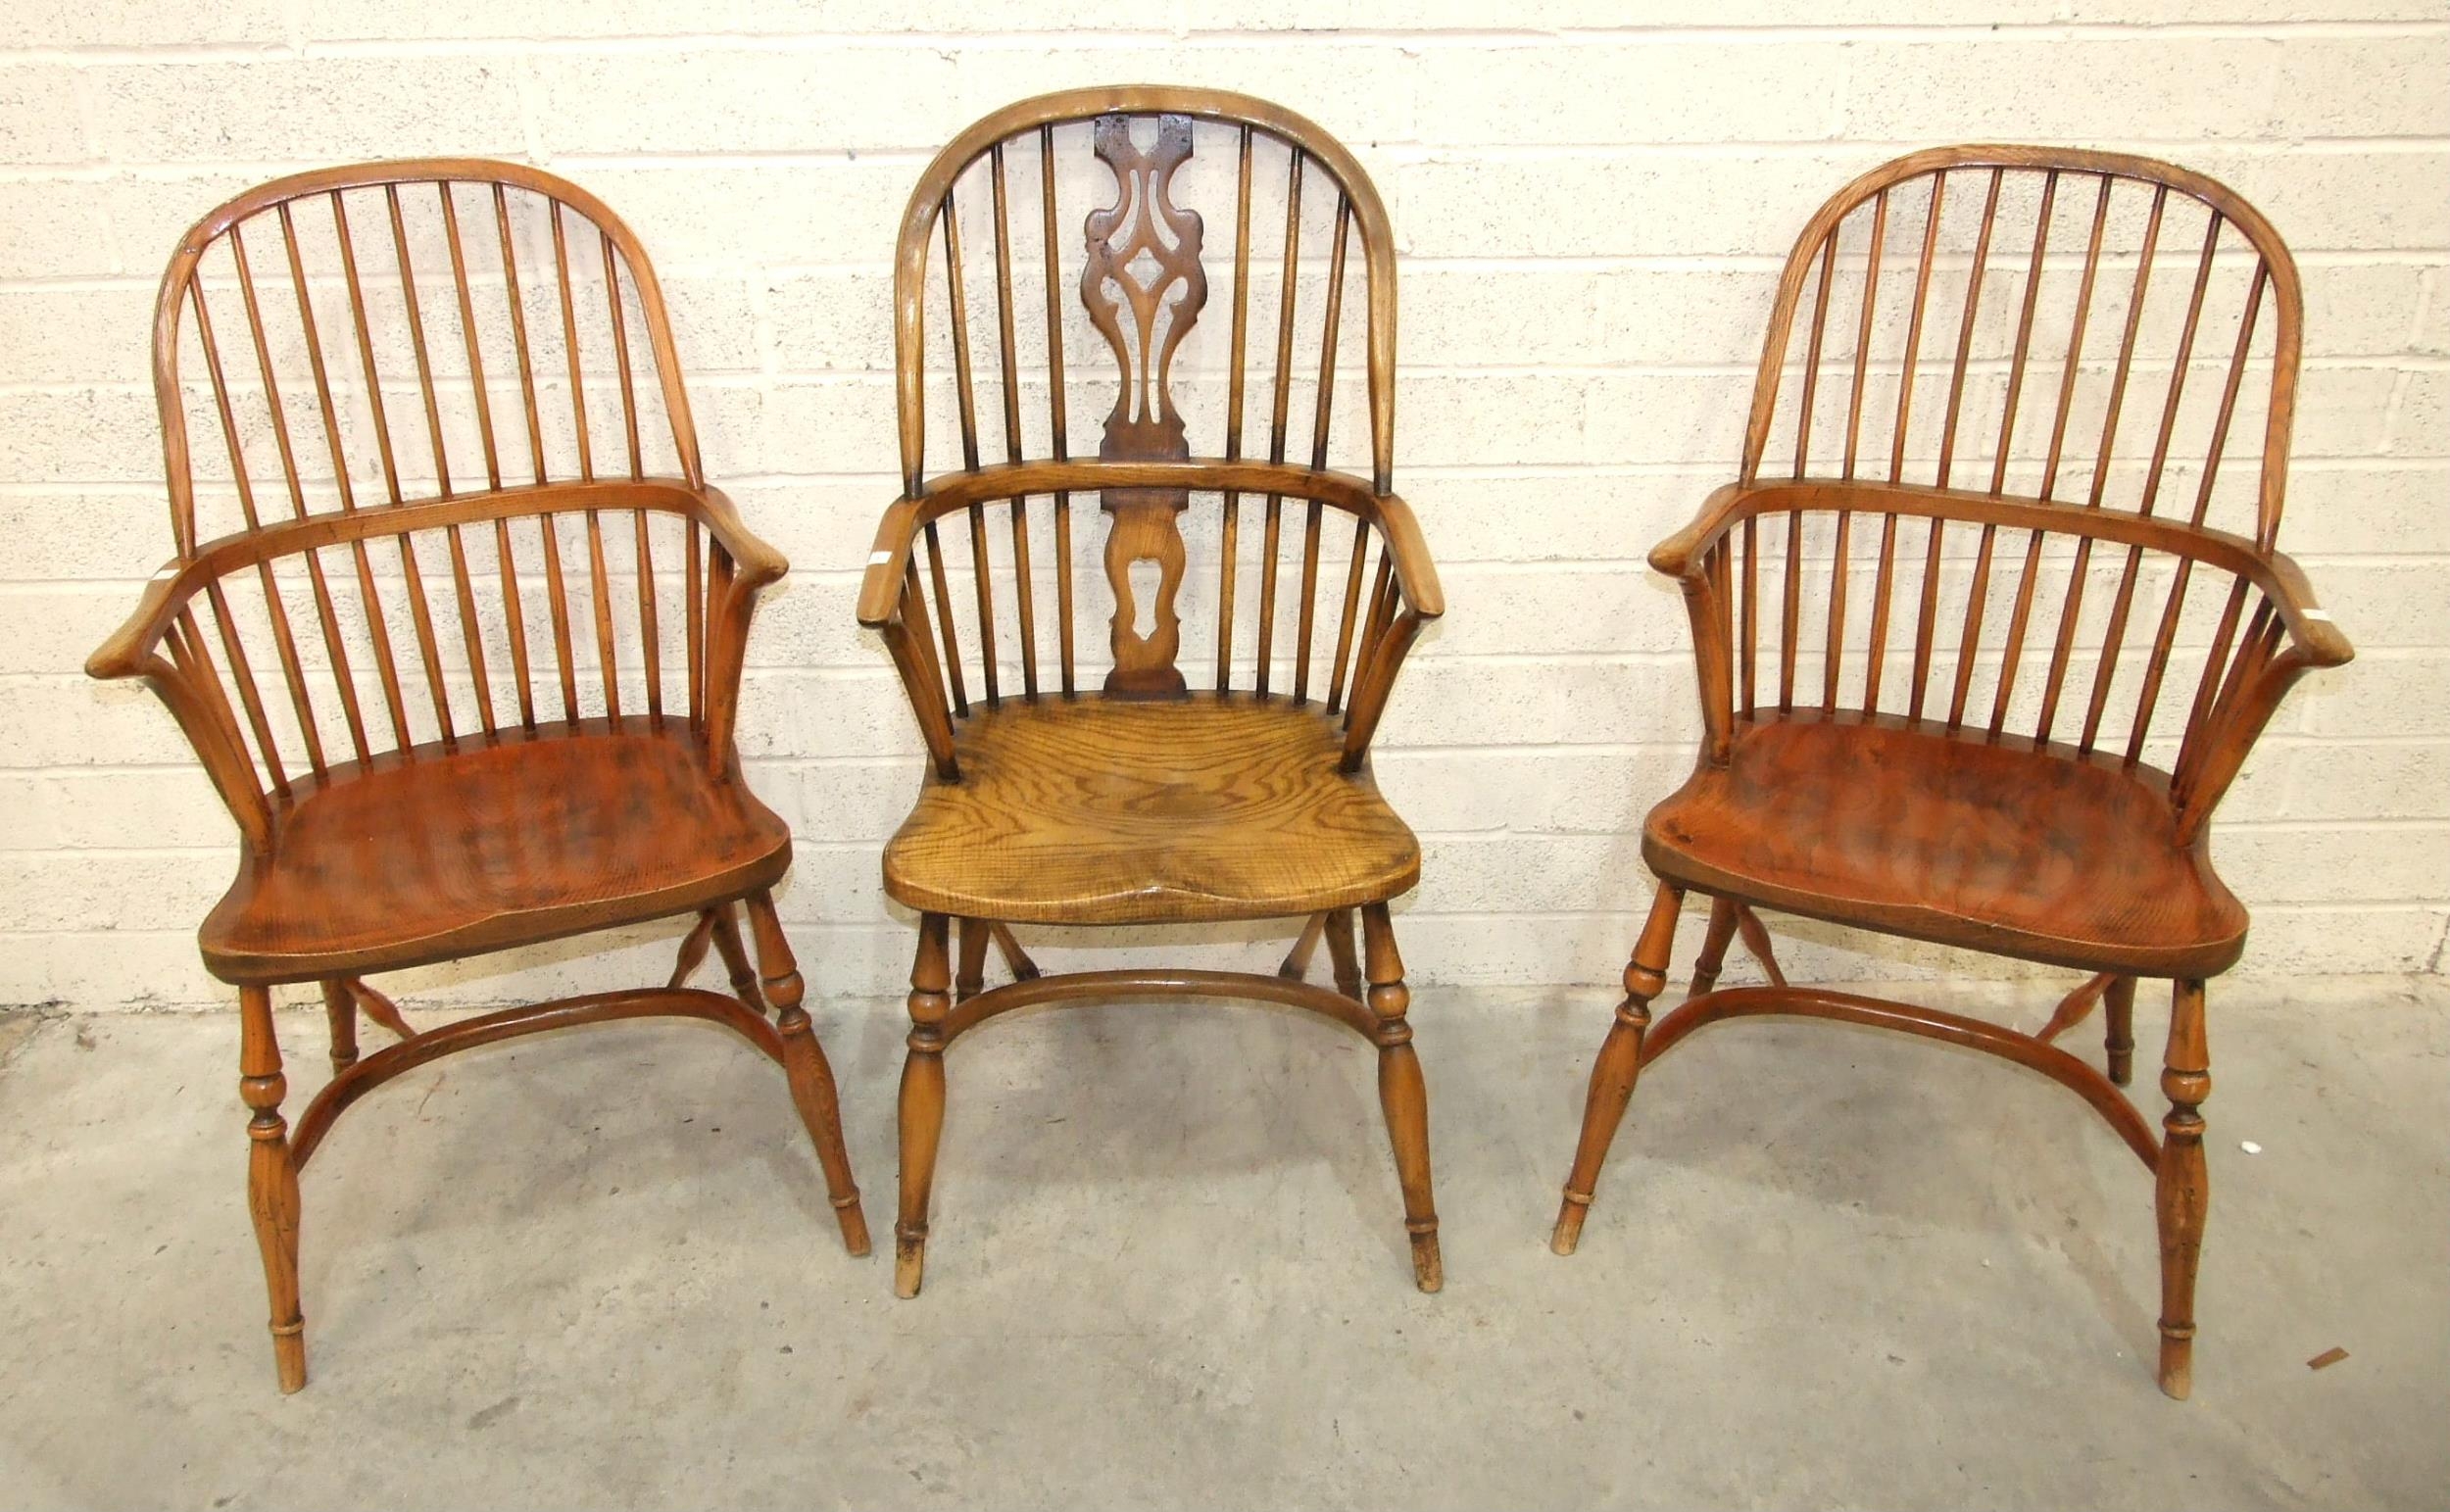 A pair of elm and beech comb-back Windsor chairs with crinoline stretchers and turned legs, (reddish